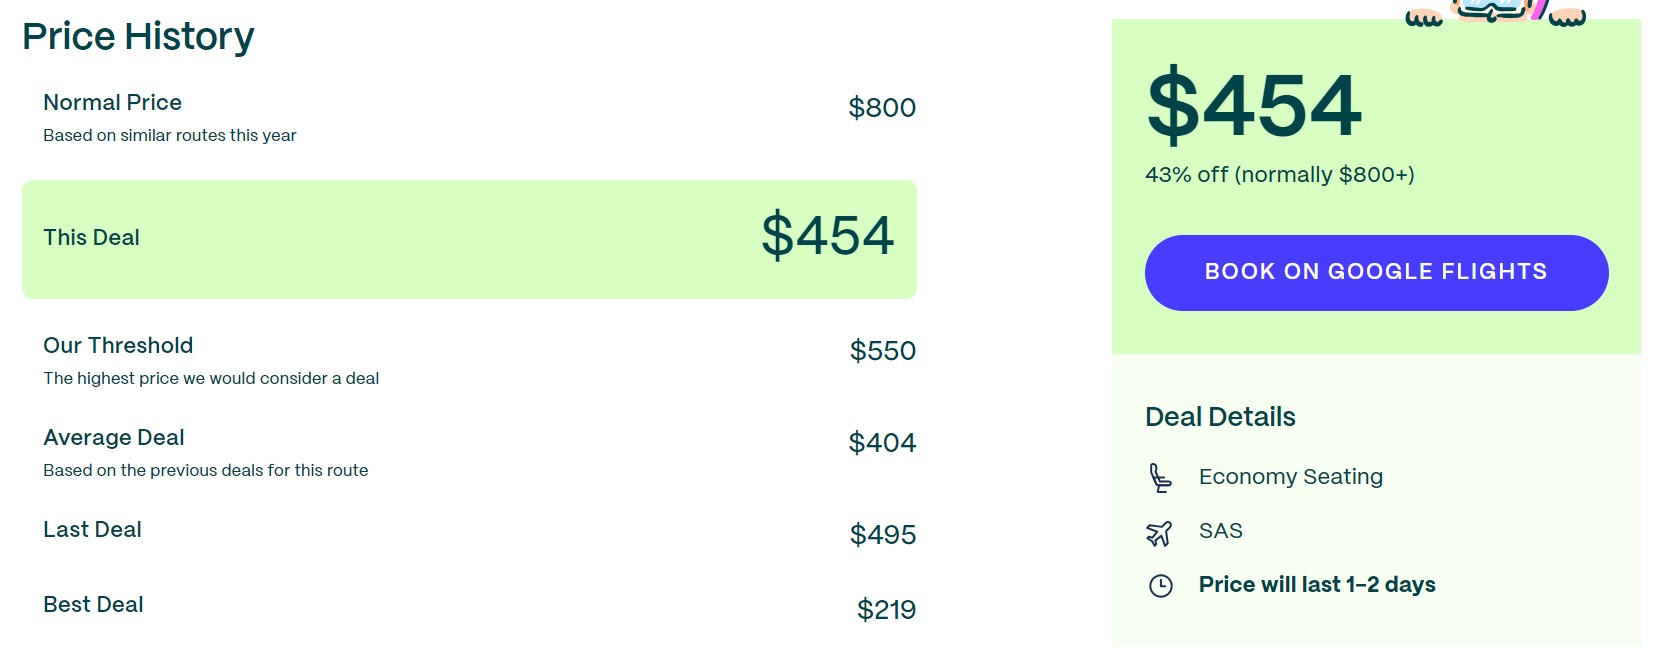 Screenshot from the Going travel website showing the price history for a flight deal from NYC to Copenhagen, Denmark